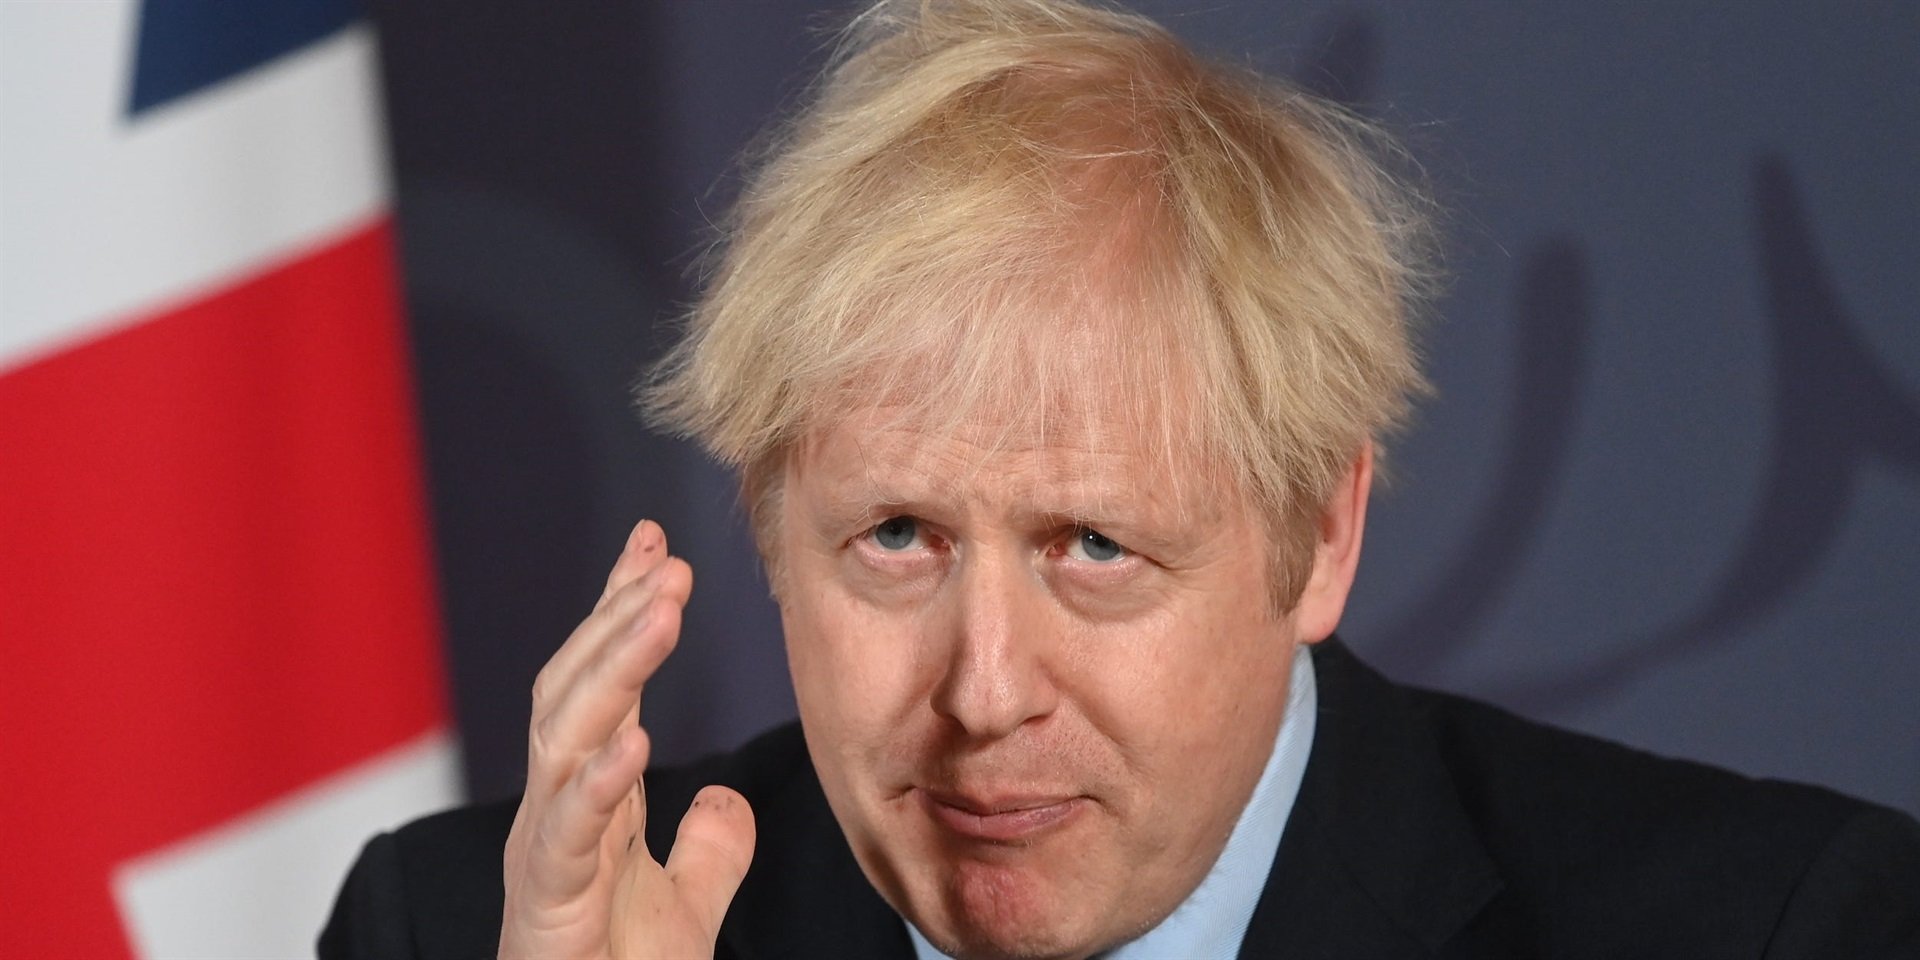 scottish-leader-accuses-boris-johnson-of-fearing-democracy-over-independence-issue-news24